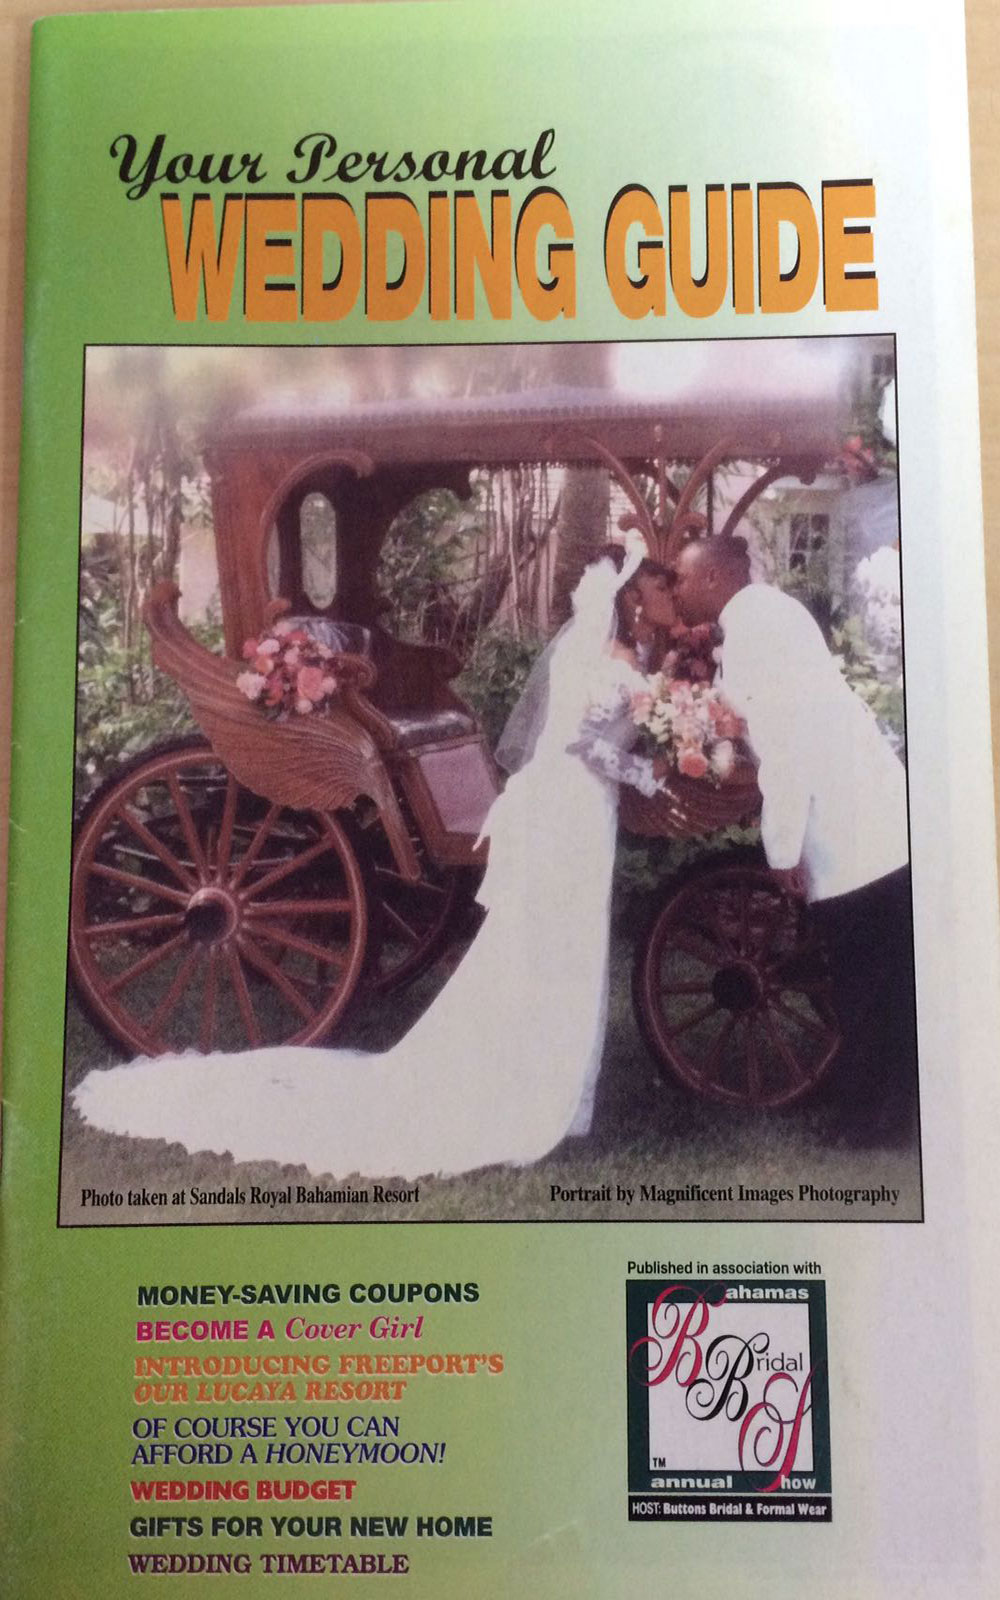 The Wedding Guide 2001-2002